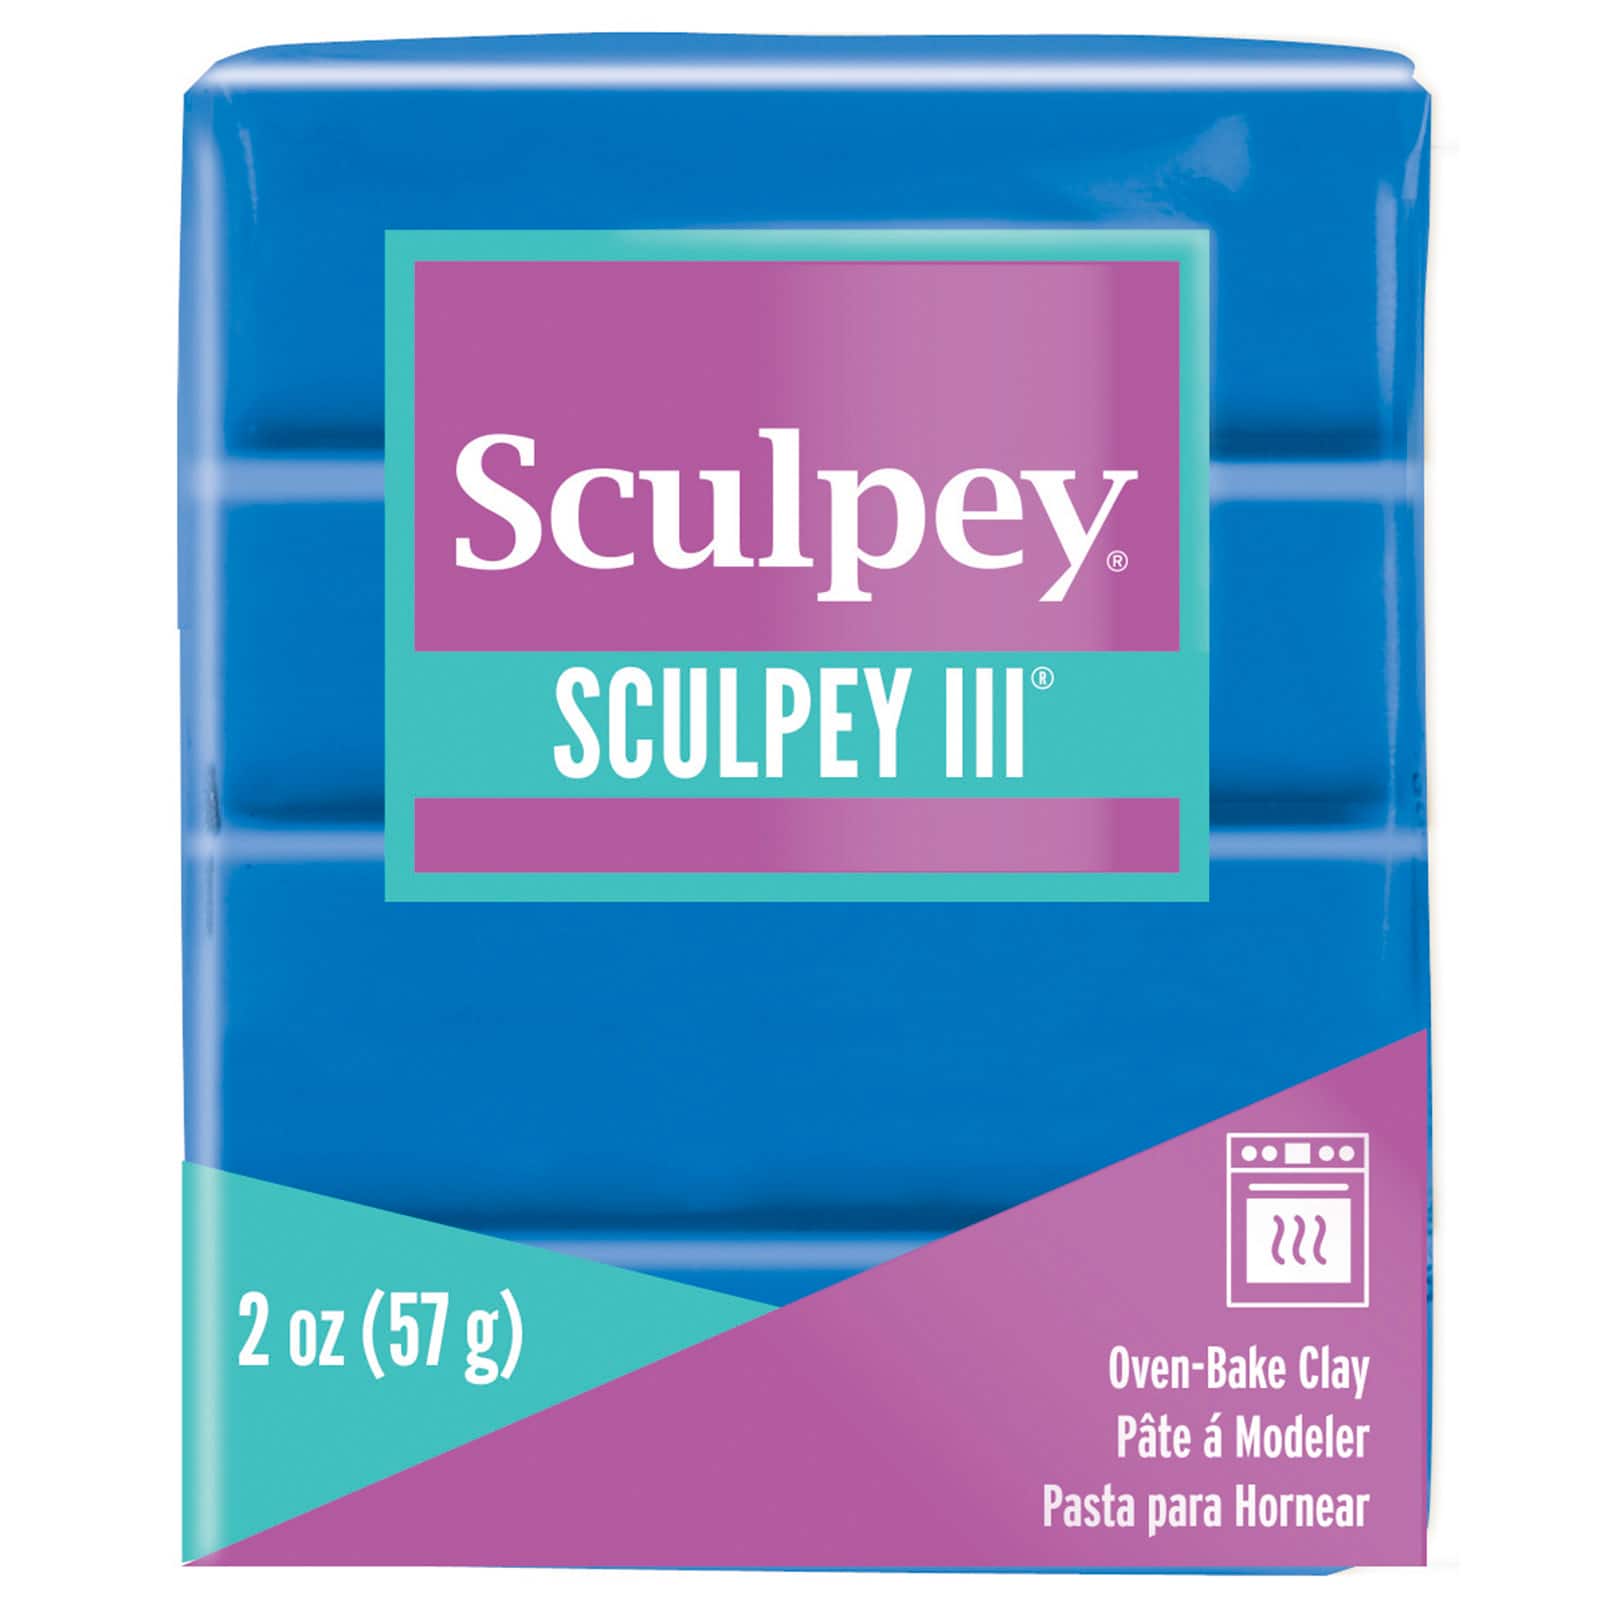 where to buy sculpting clay near me